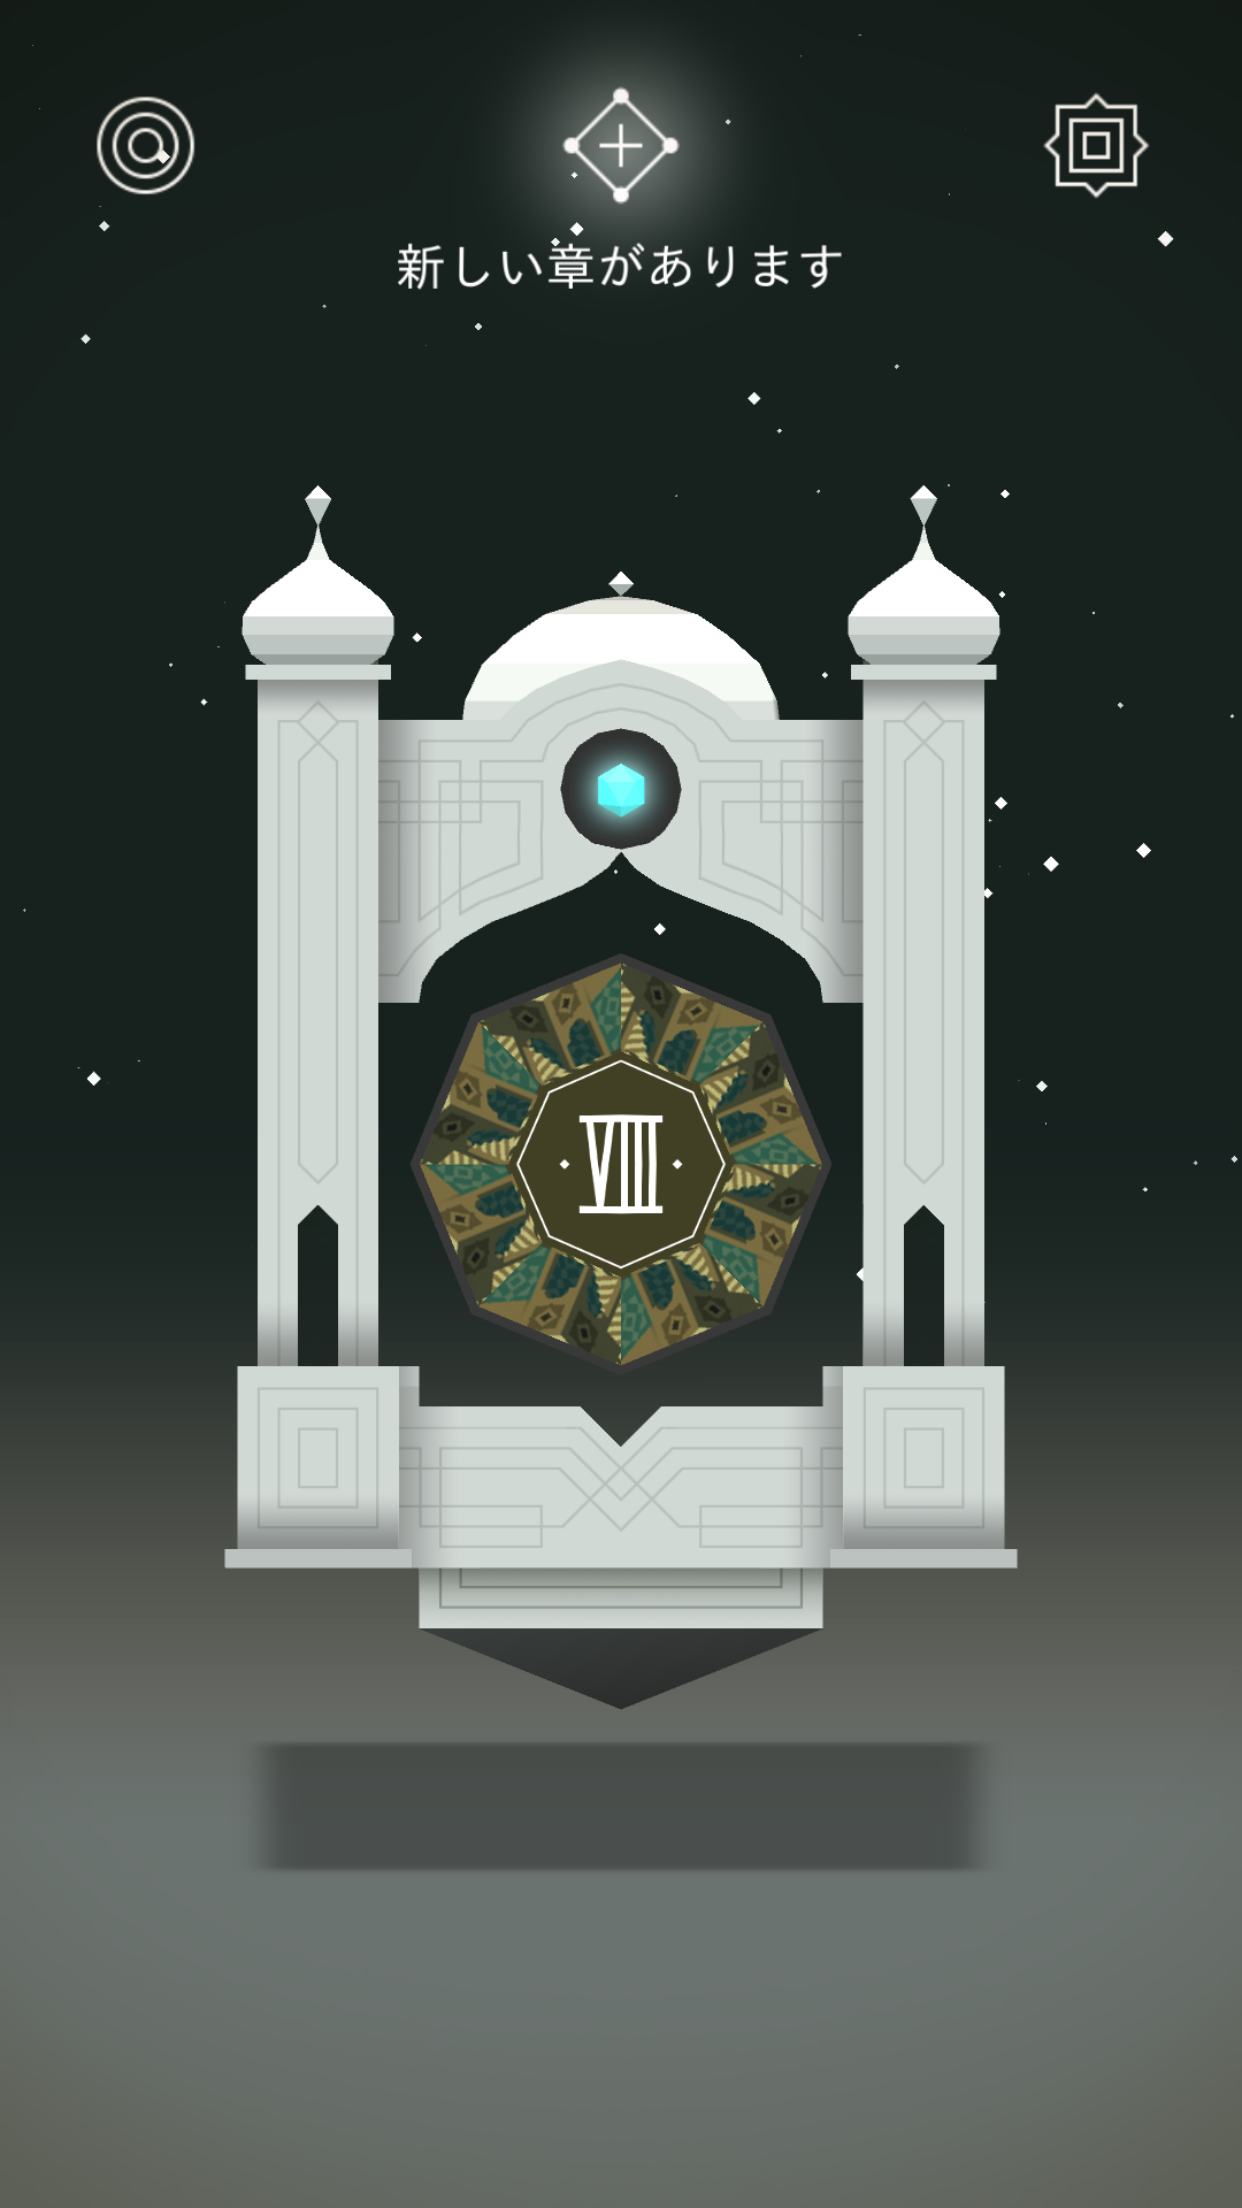 Apple Design Awards 14を受賞したパズルゲームアプリ Monument Valley に待望の新ステージが追加 Time To Live Forever